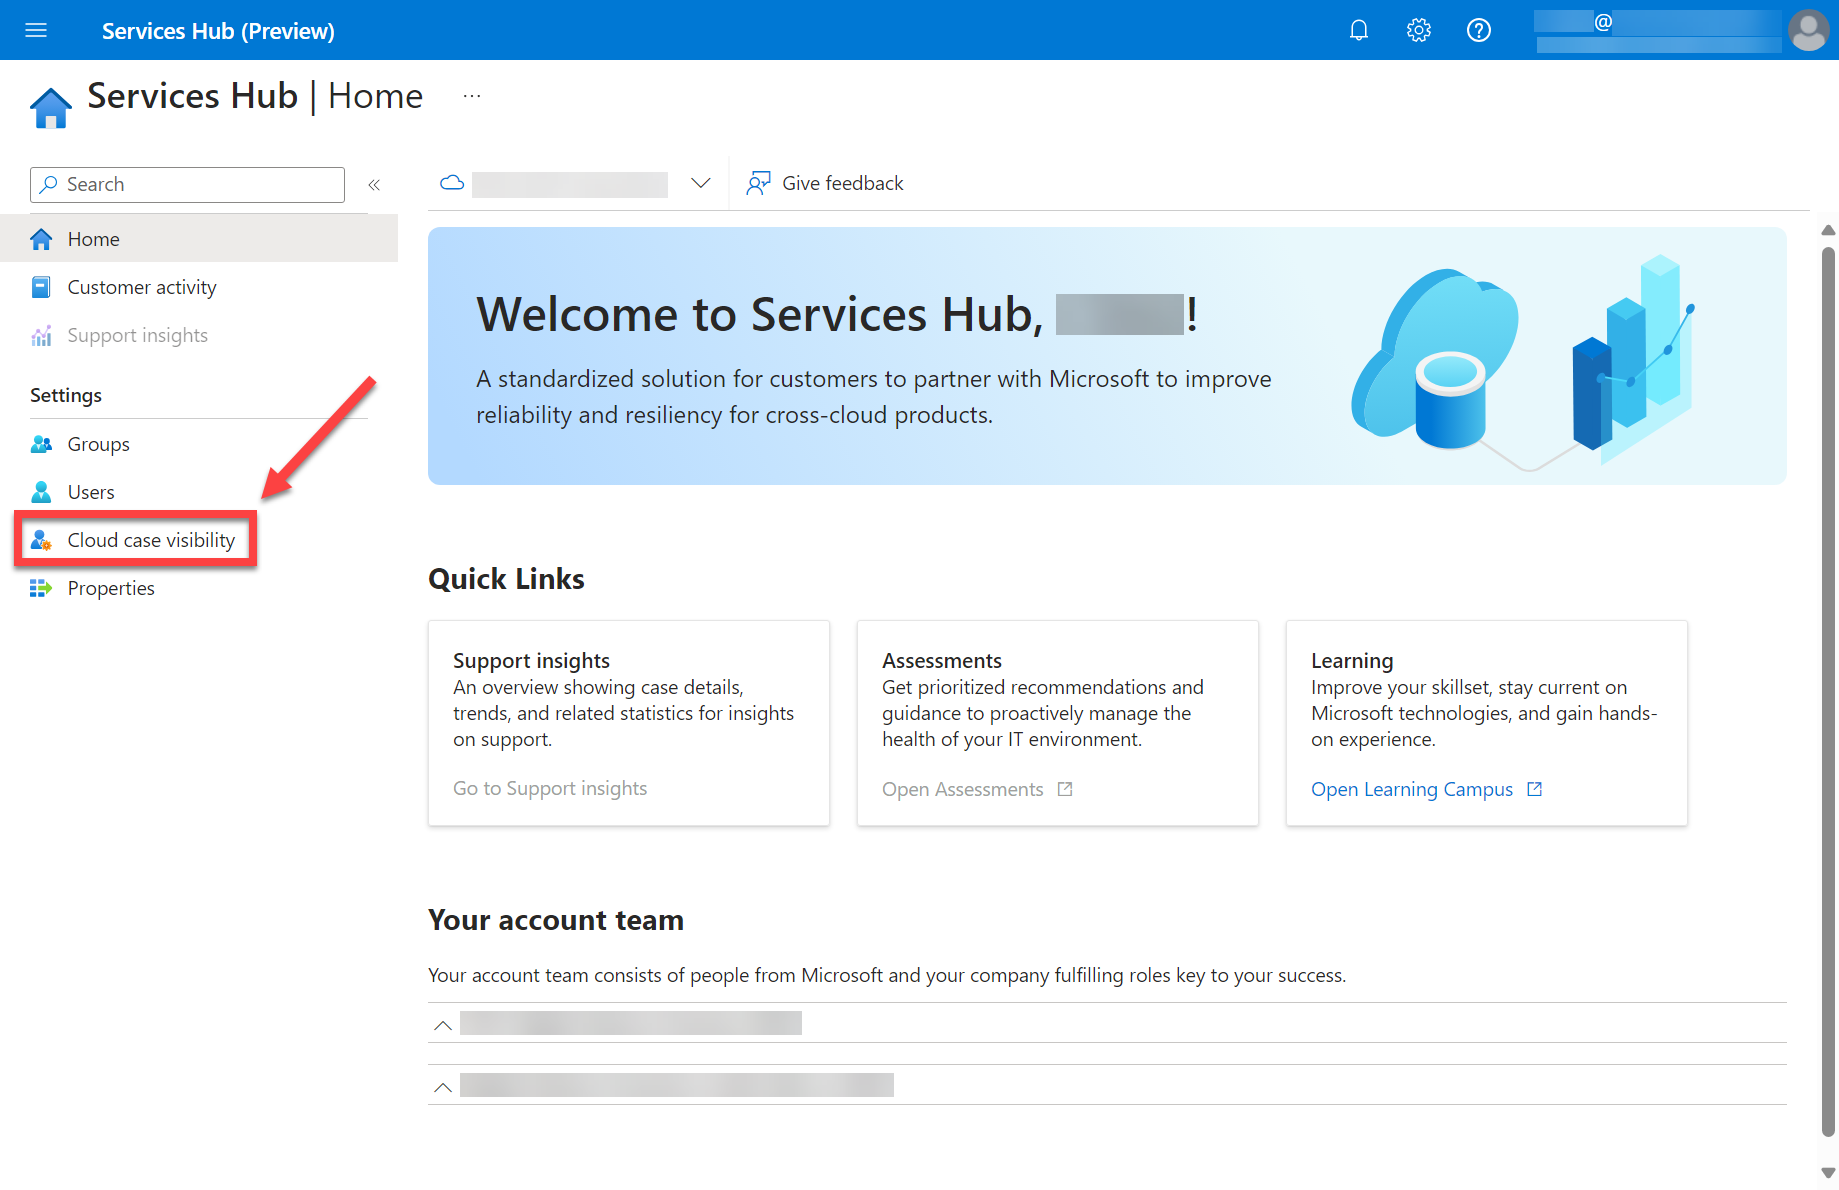 Home page di Services Hub Preview.